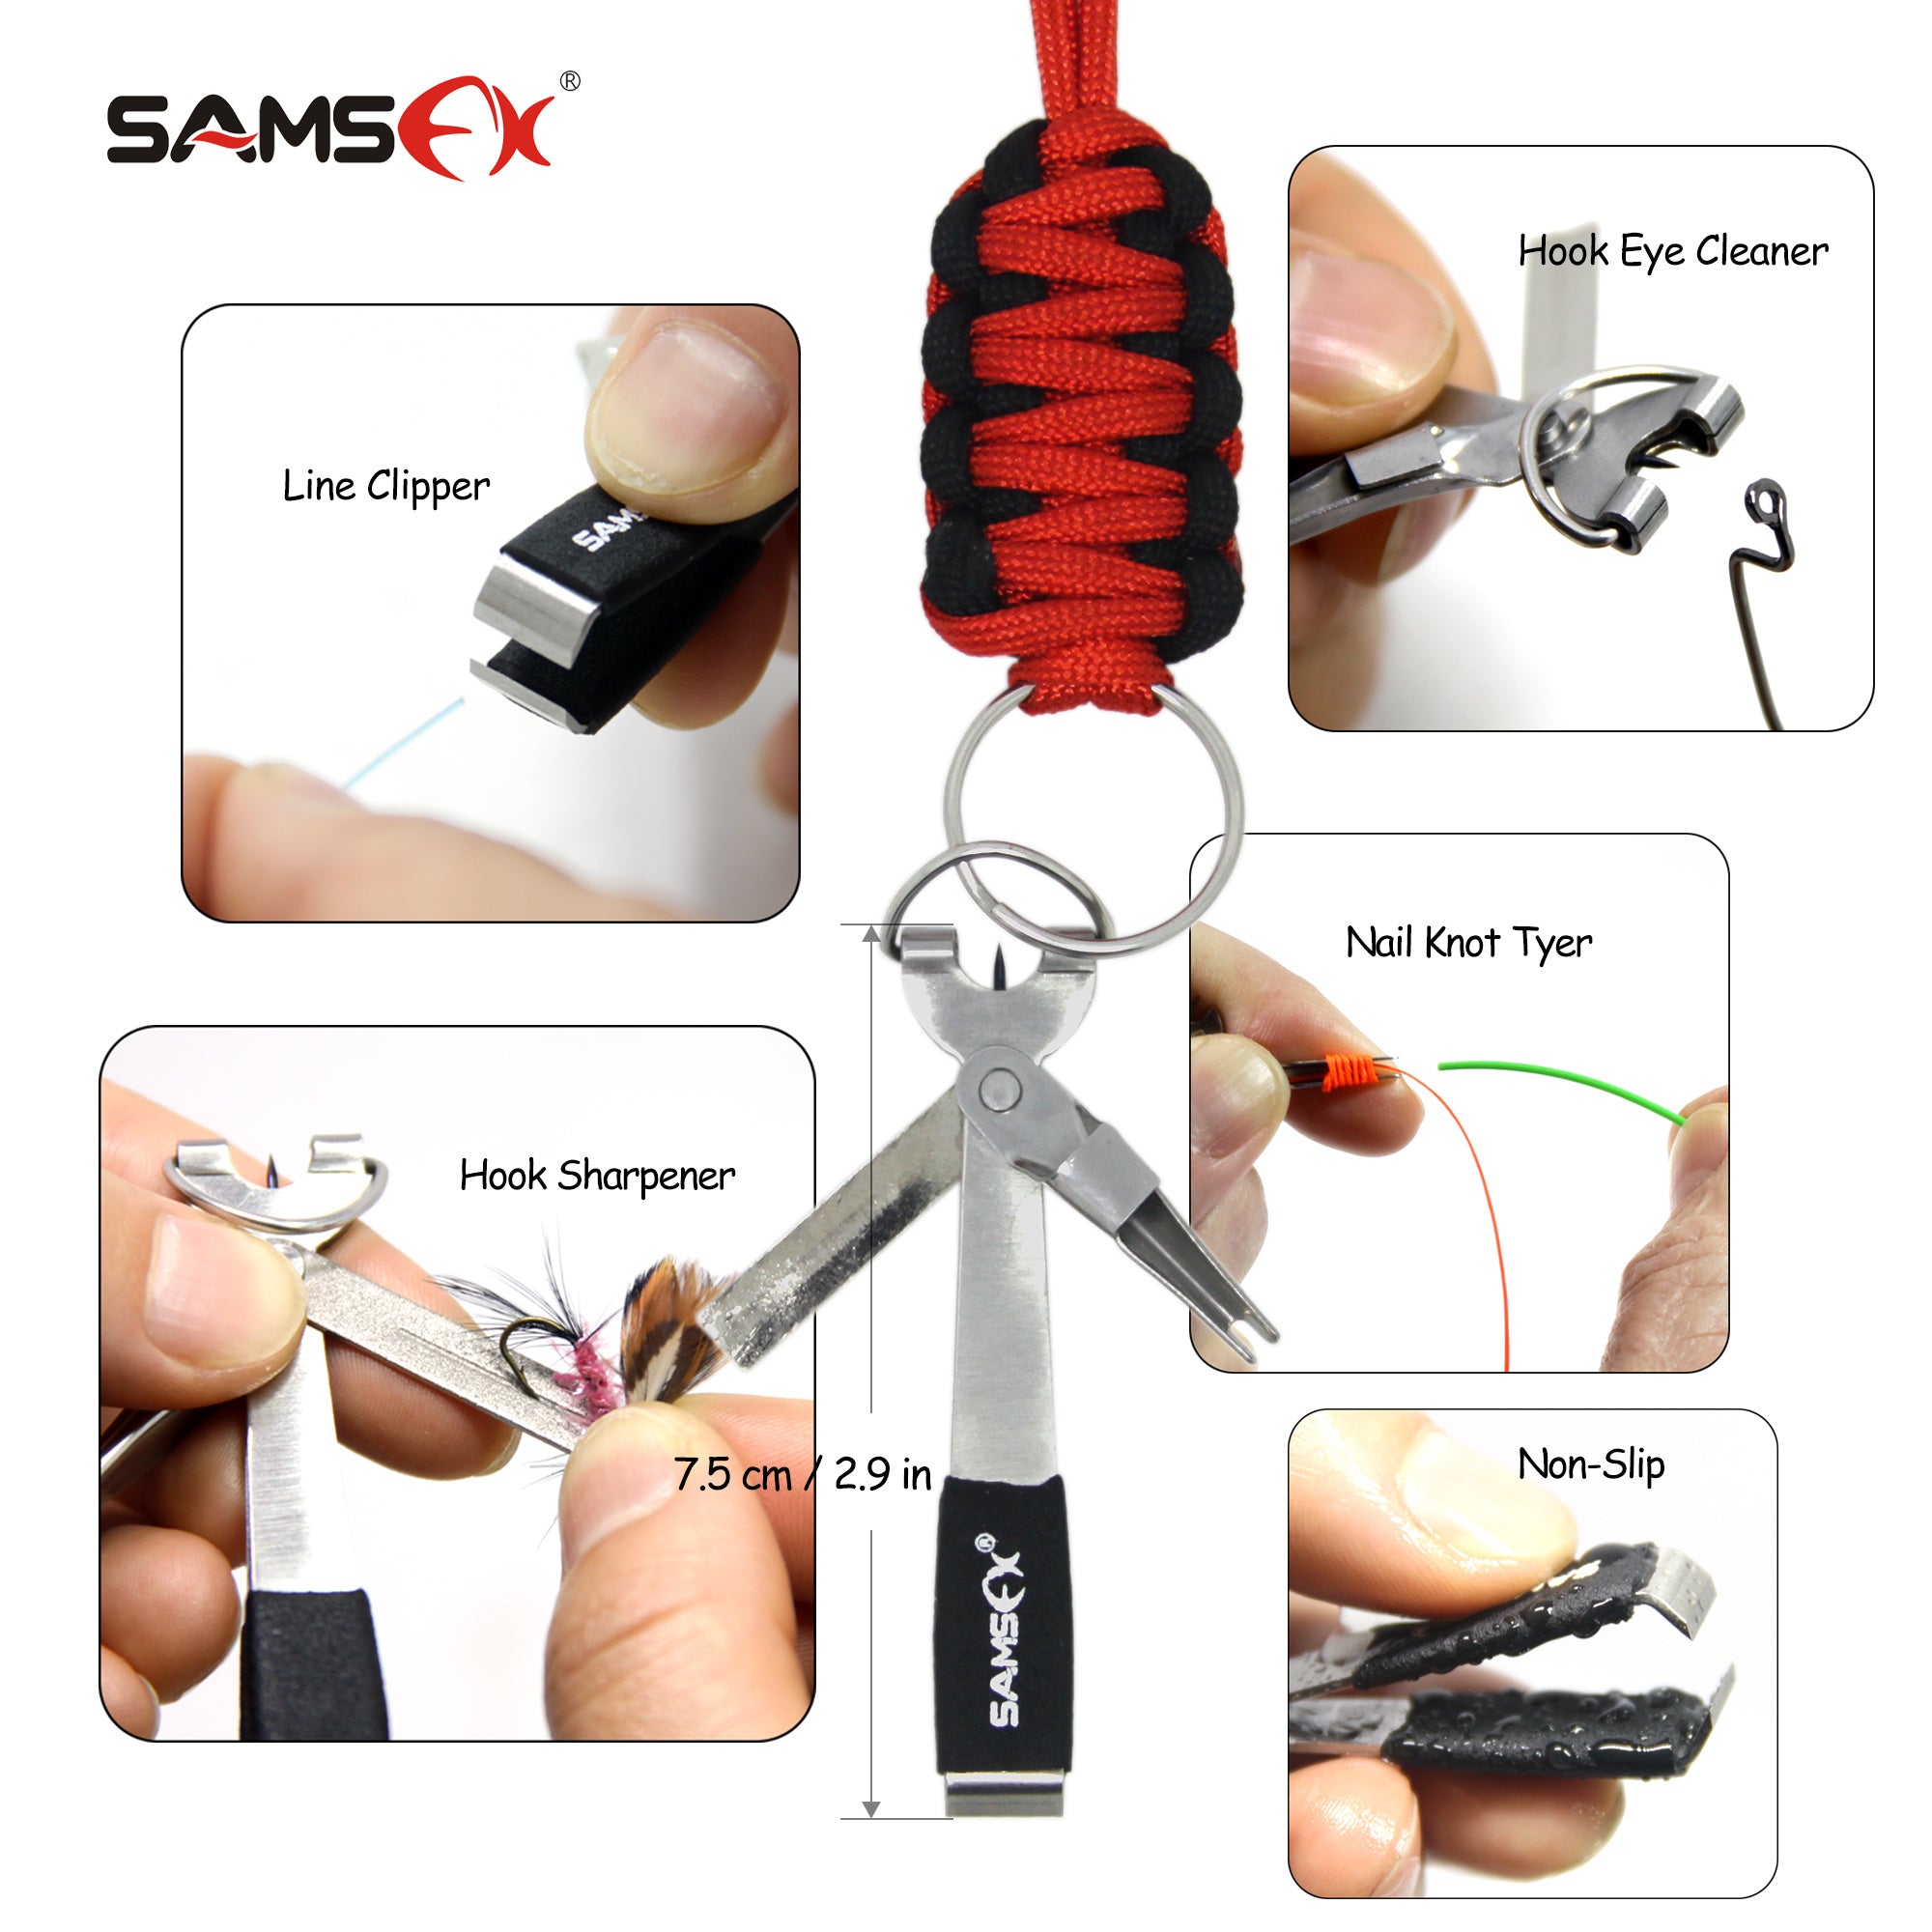 My-Tie Fishing knot tying tool from 3A Outdoors (With Safety Lanyard)